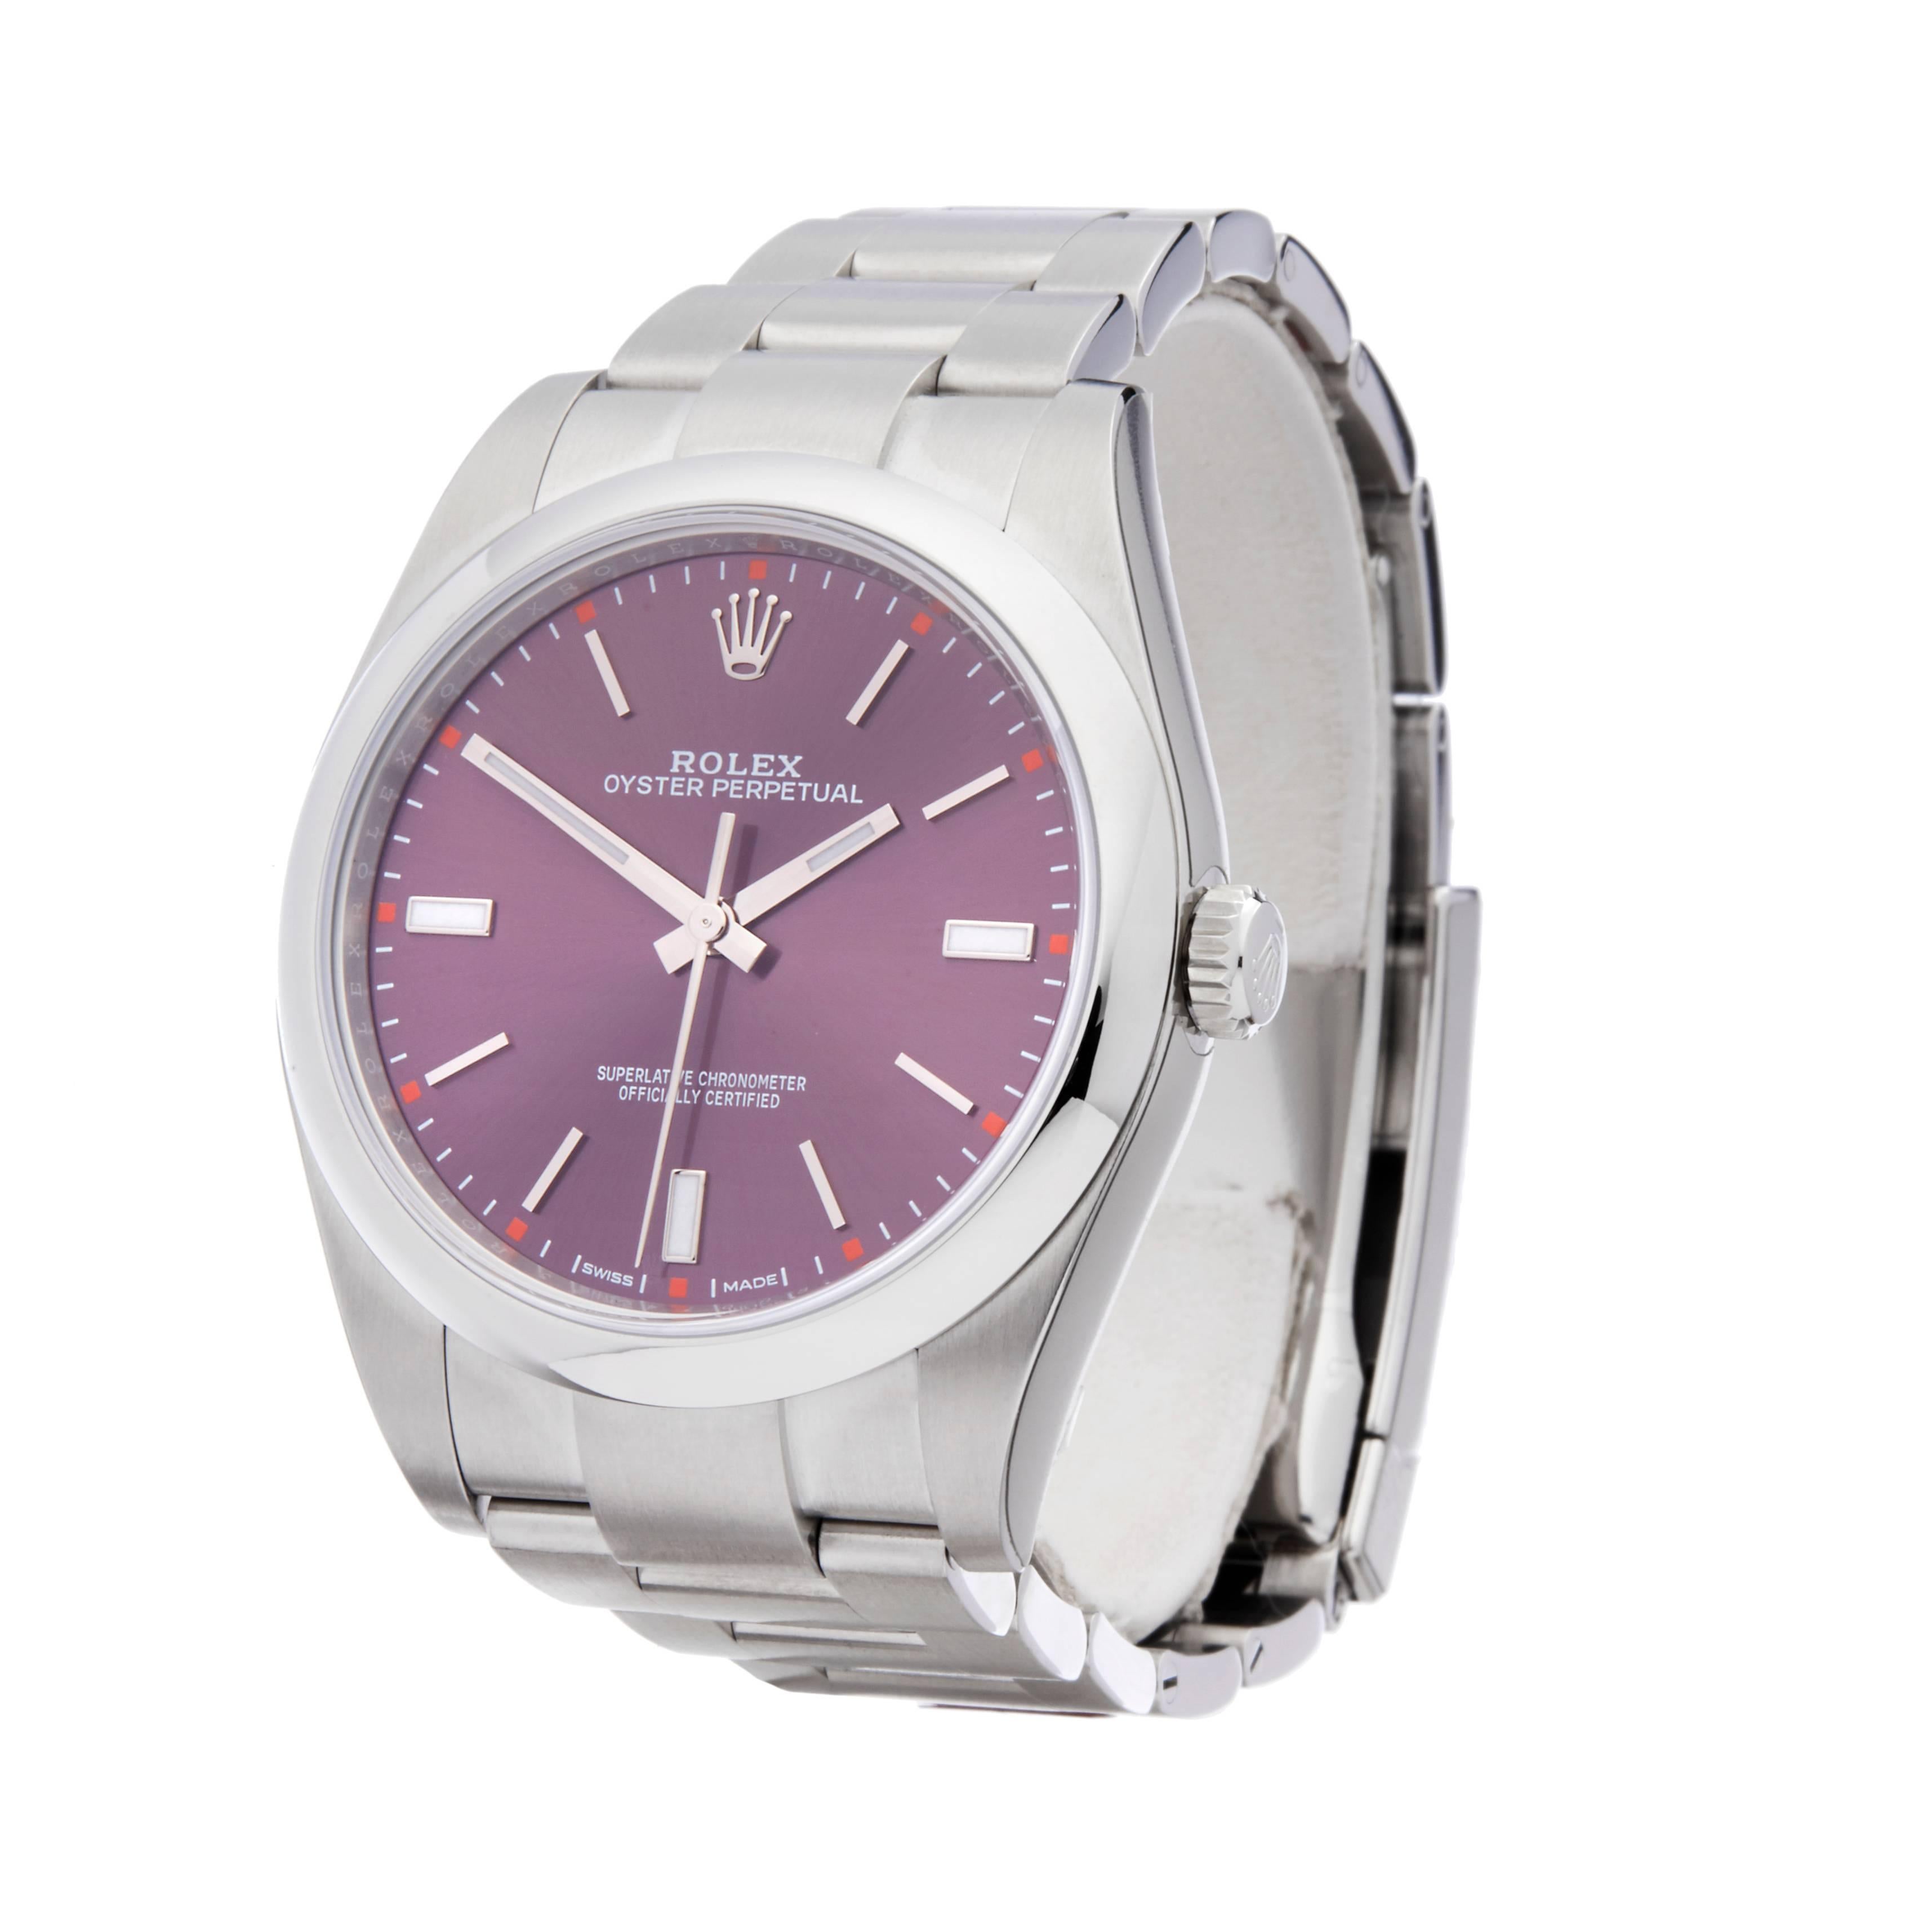 Ref: COM1474
Manufacturer: Rolex
Model: Oyster Perpetual
Model Ref: 114300
Age: 12th April 2017
Gender: Mens
Complete With: Box & Guarantee
Dial: Red Grape Baton
Glass: Sapphire Crystal
Movement: Automatic
Water Resistance: To Manufacturers